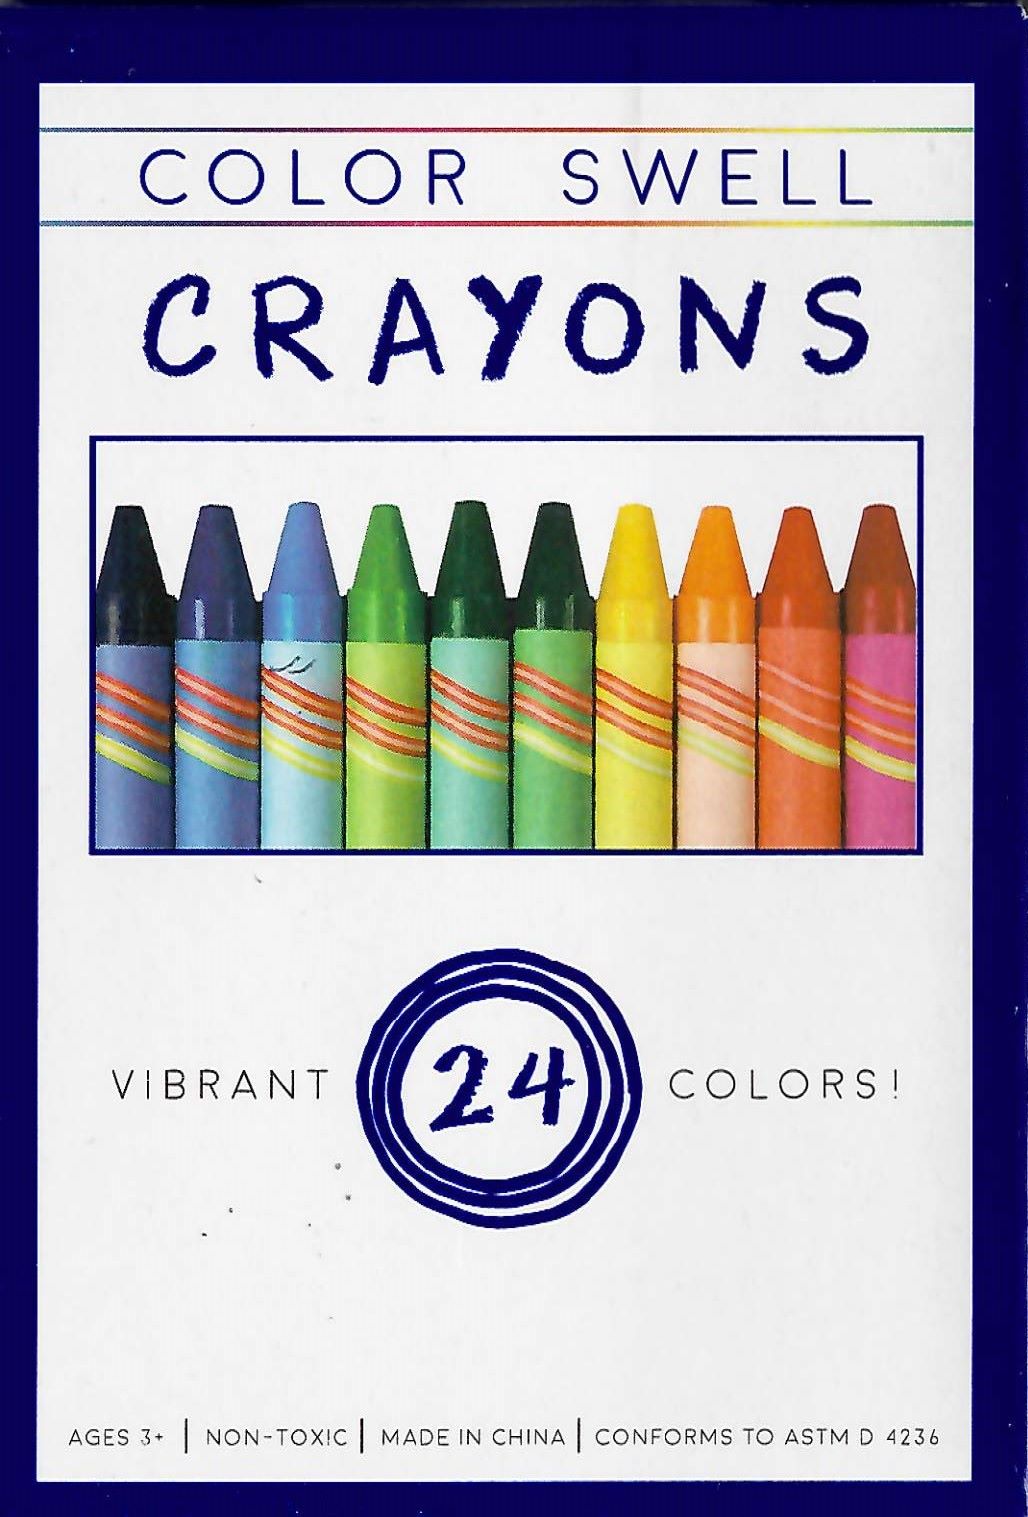 Colorswell Crayons